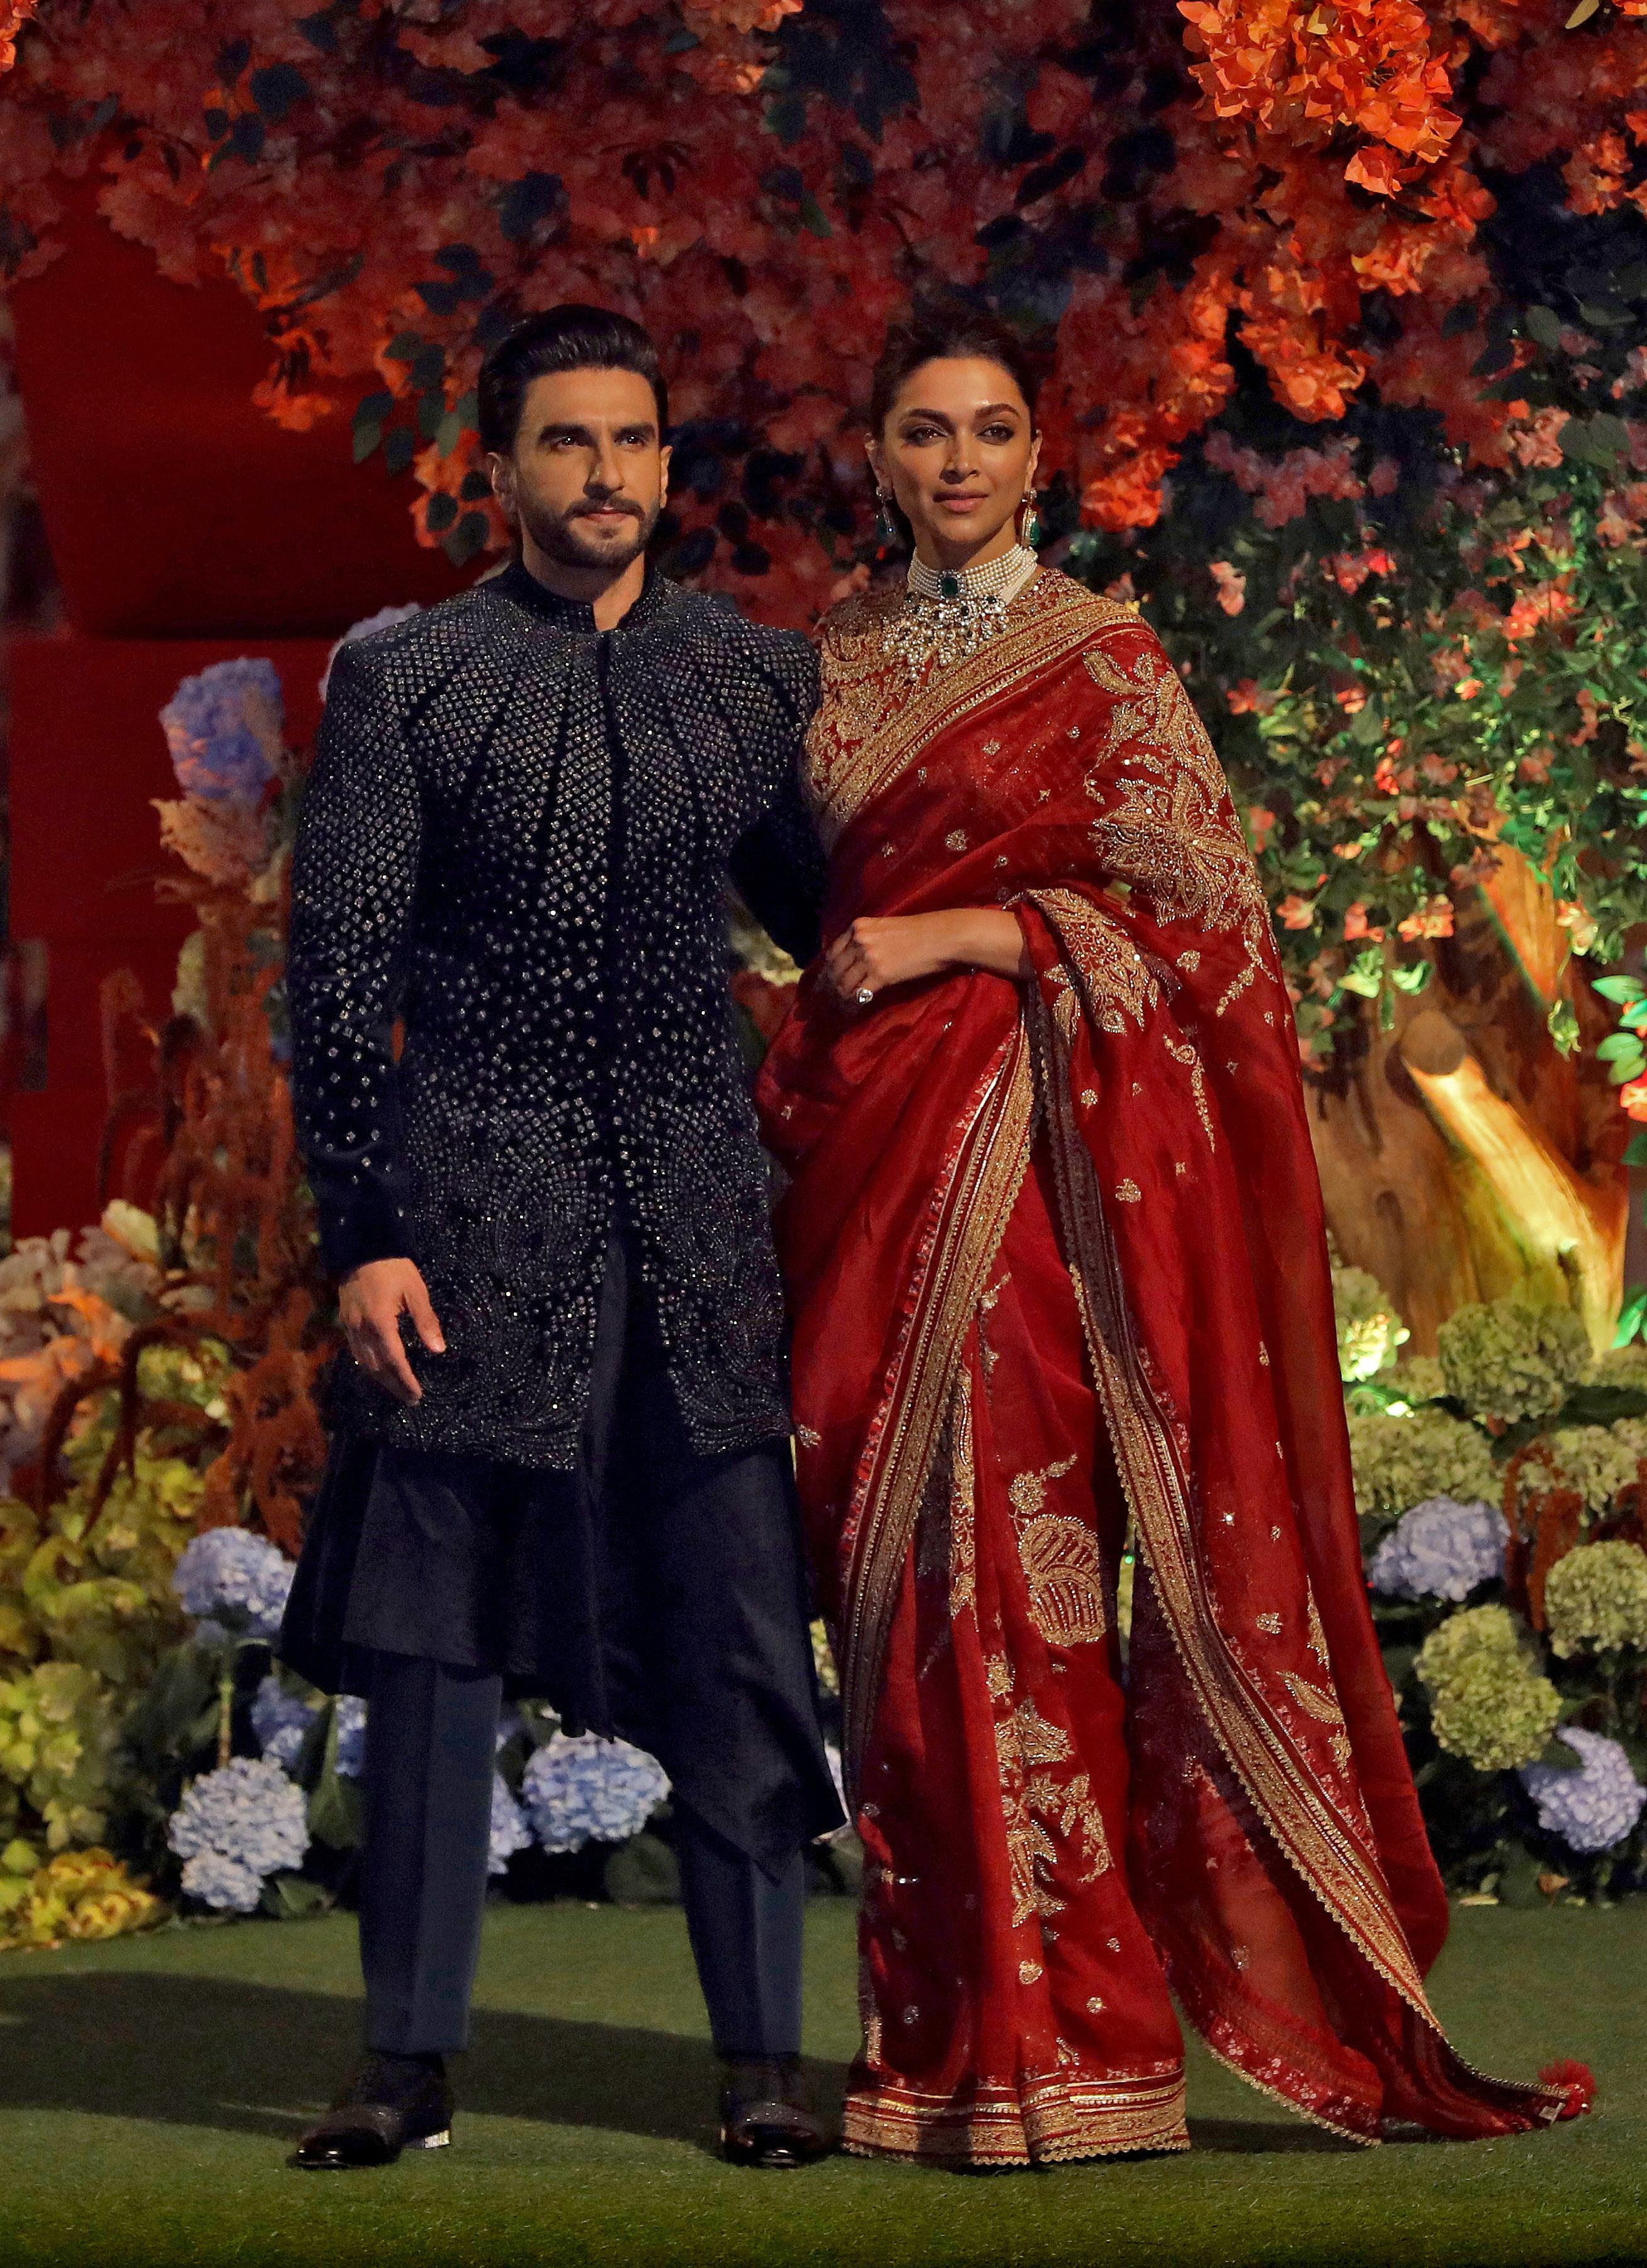 In PICS: Indias 8 Most Expensive Weddings Of All Time, News